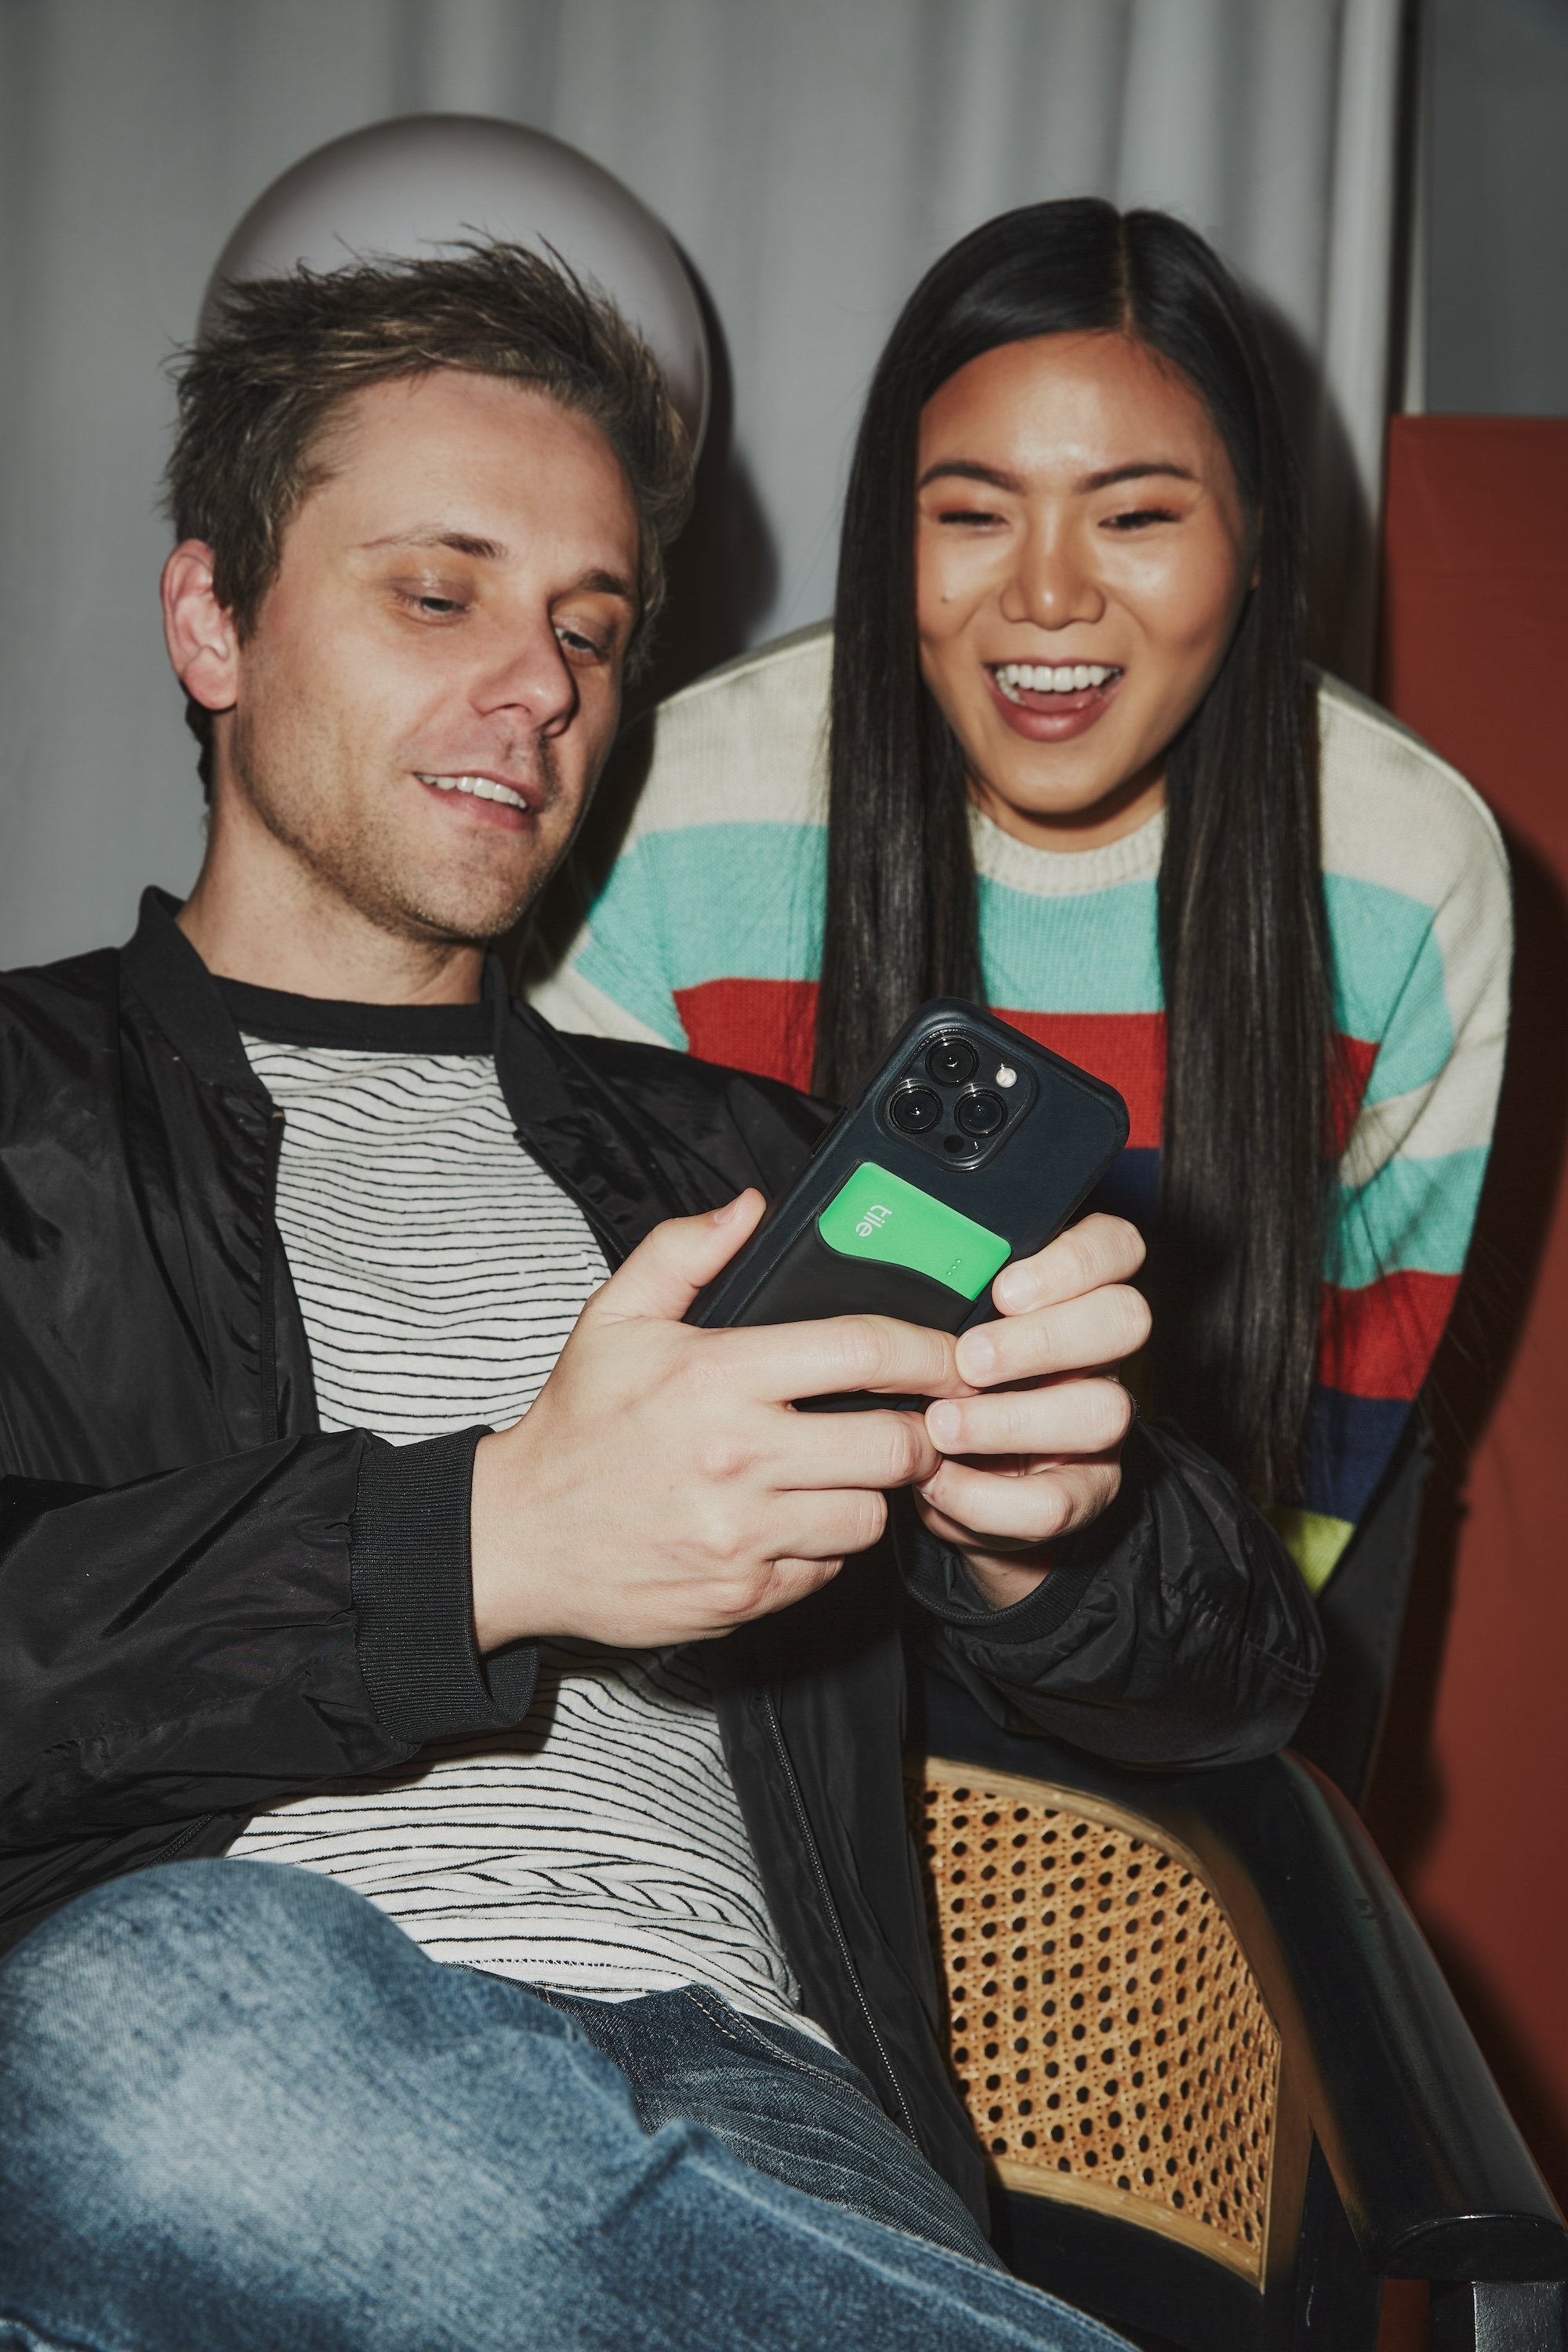 Man and woman smiling while looking at a smartphone he&#x27;s holding; the woman wears a striped sweater